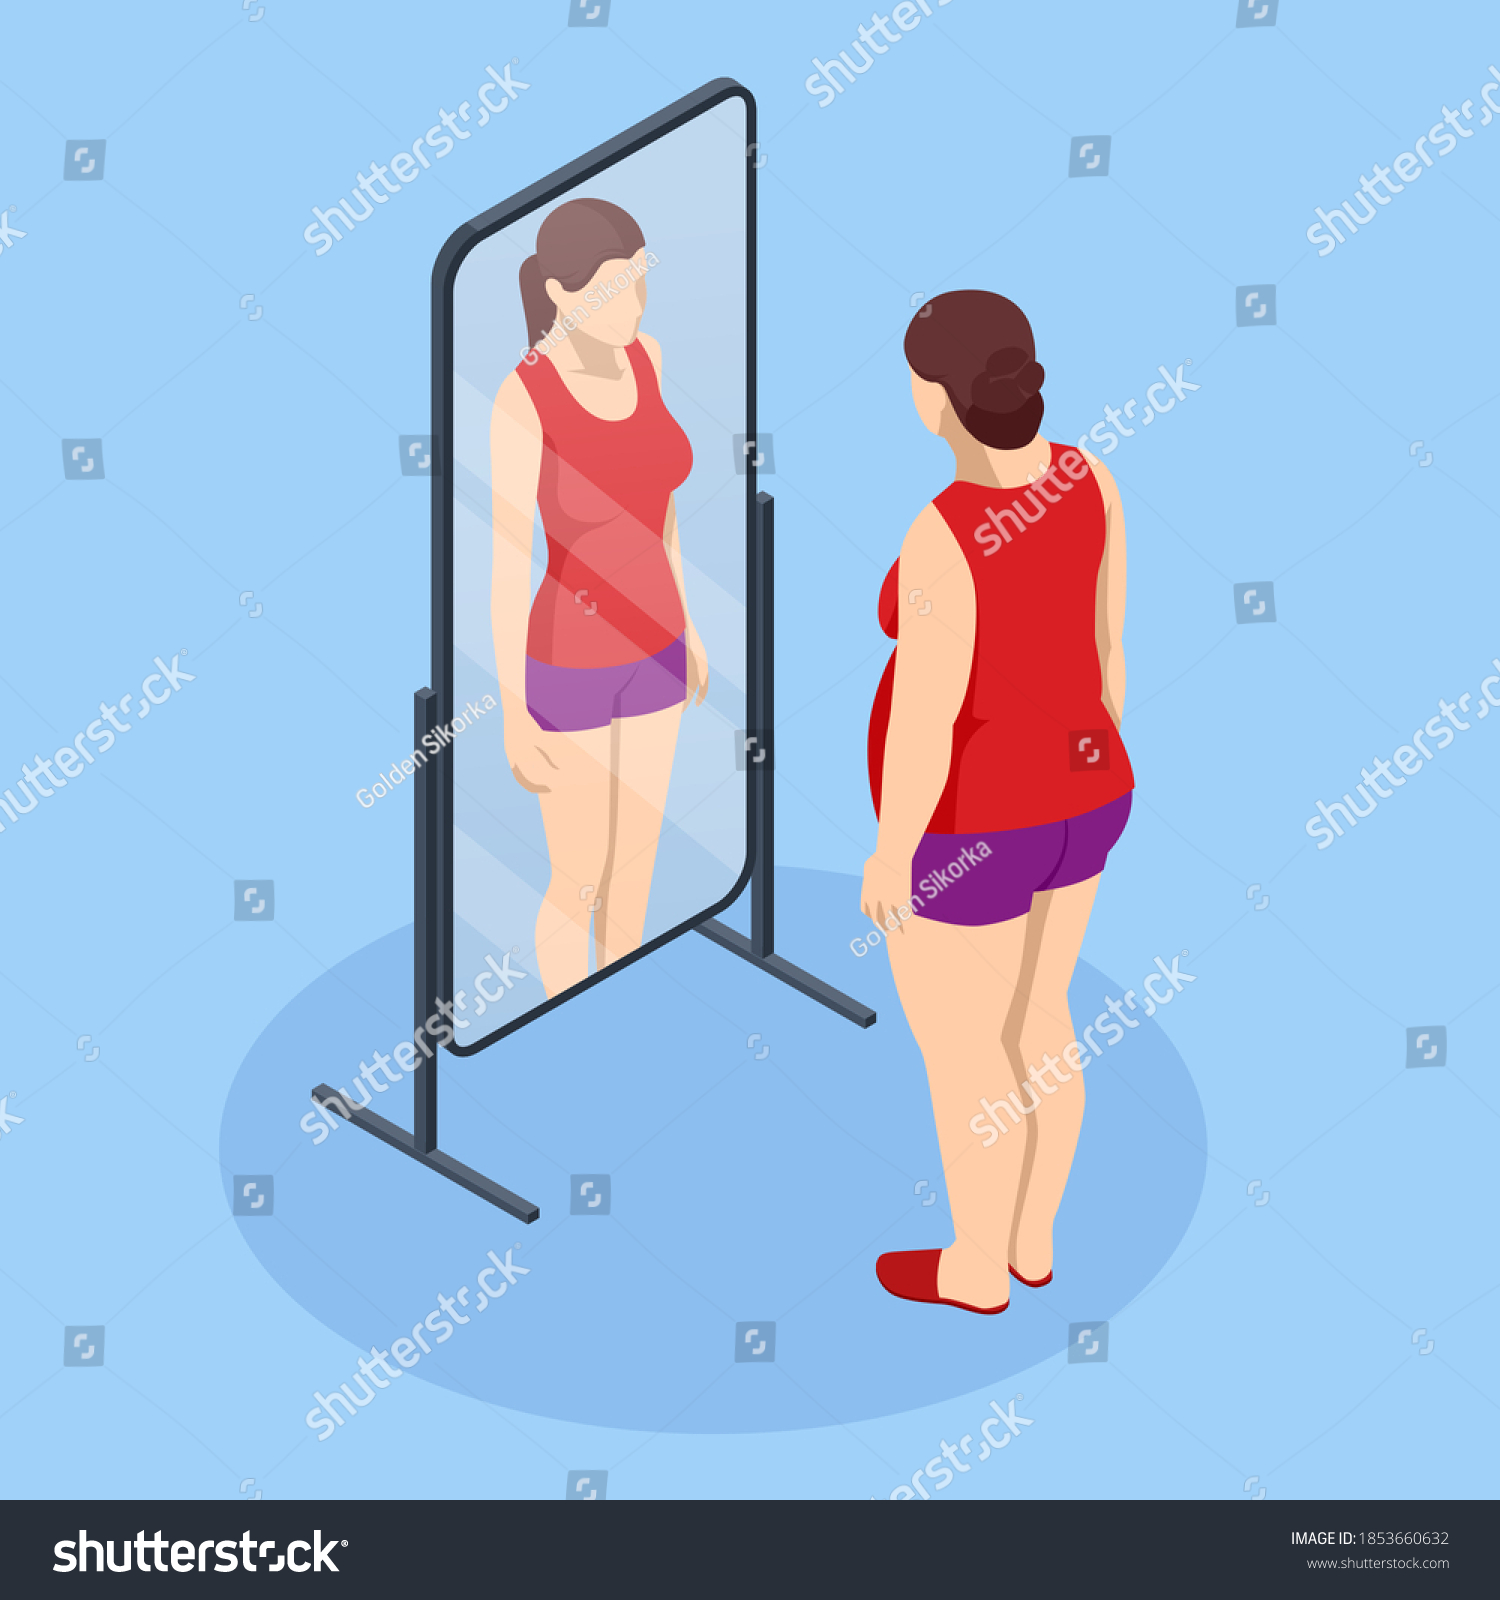 SVG of Problem of excess weight and health. Isometric Fat woman looks in the mirror and sees herself as slim. Health risk, obesity. svg